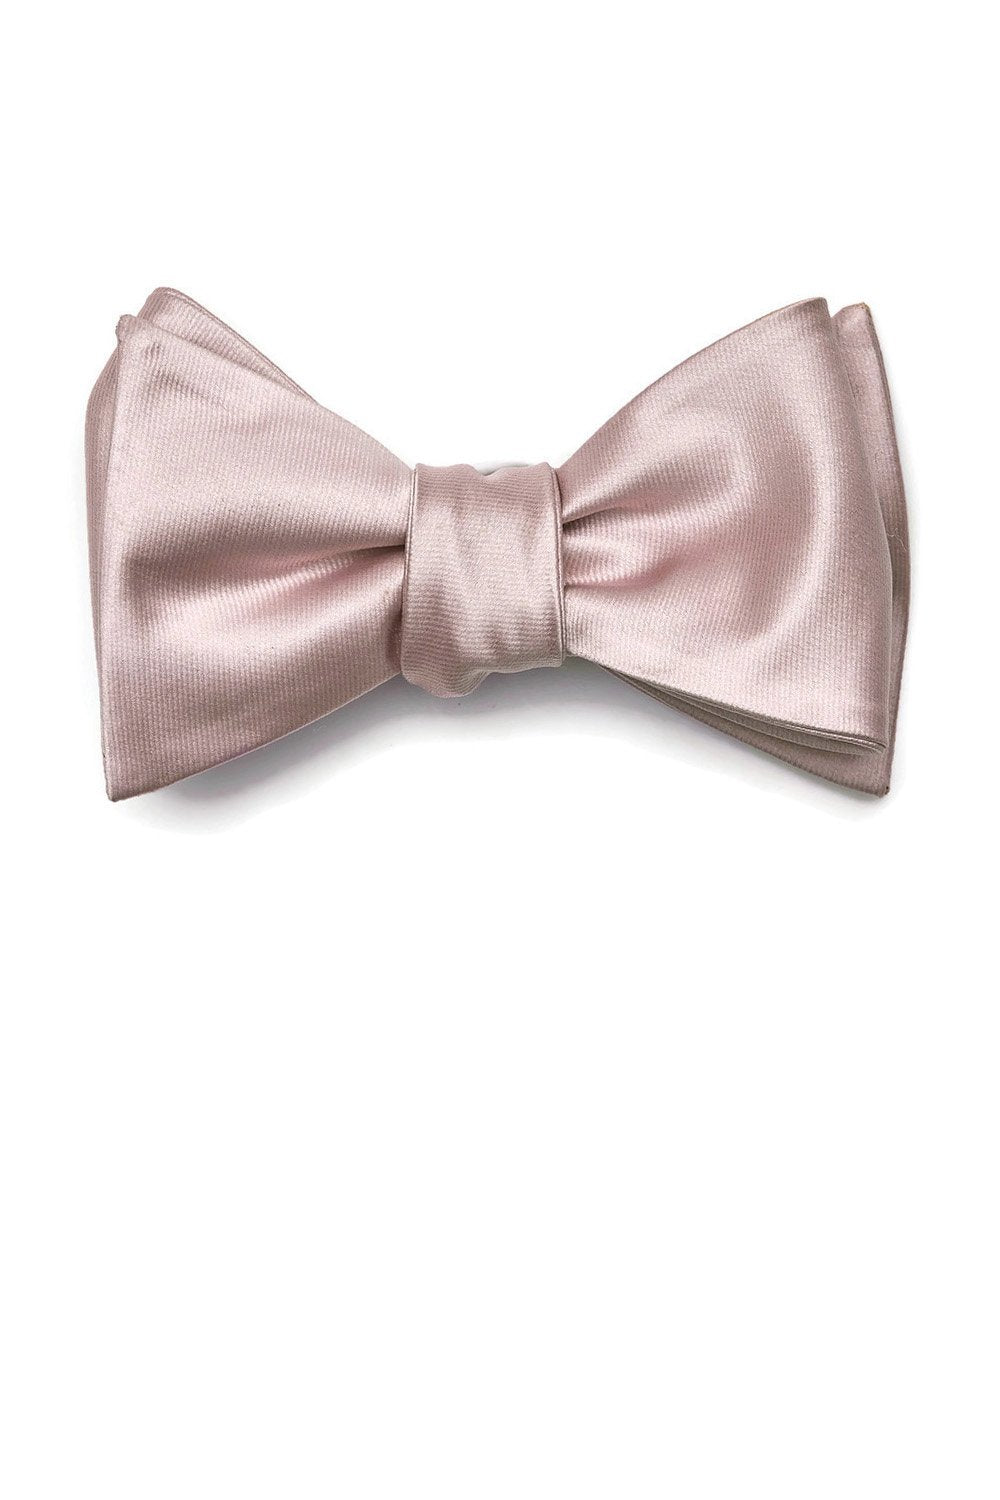 Daniel Bow Tie in mauve sateen by Birdy Grey, front view